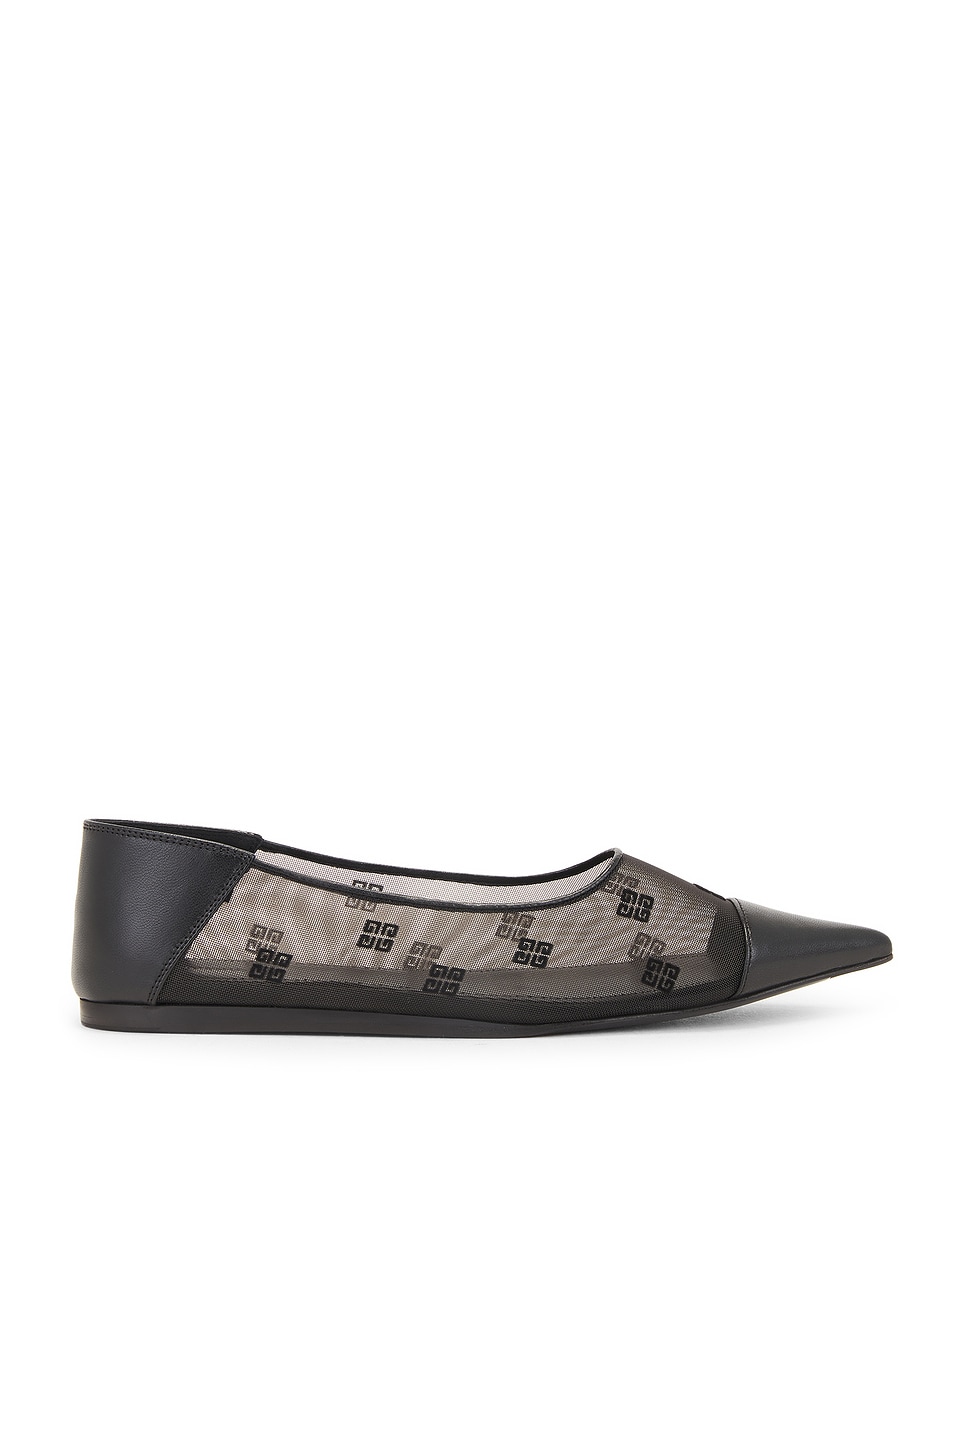 Image 1 of Givenchy Ballerina Flat in Black